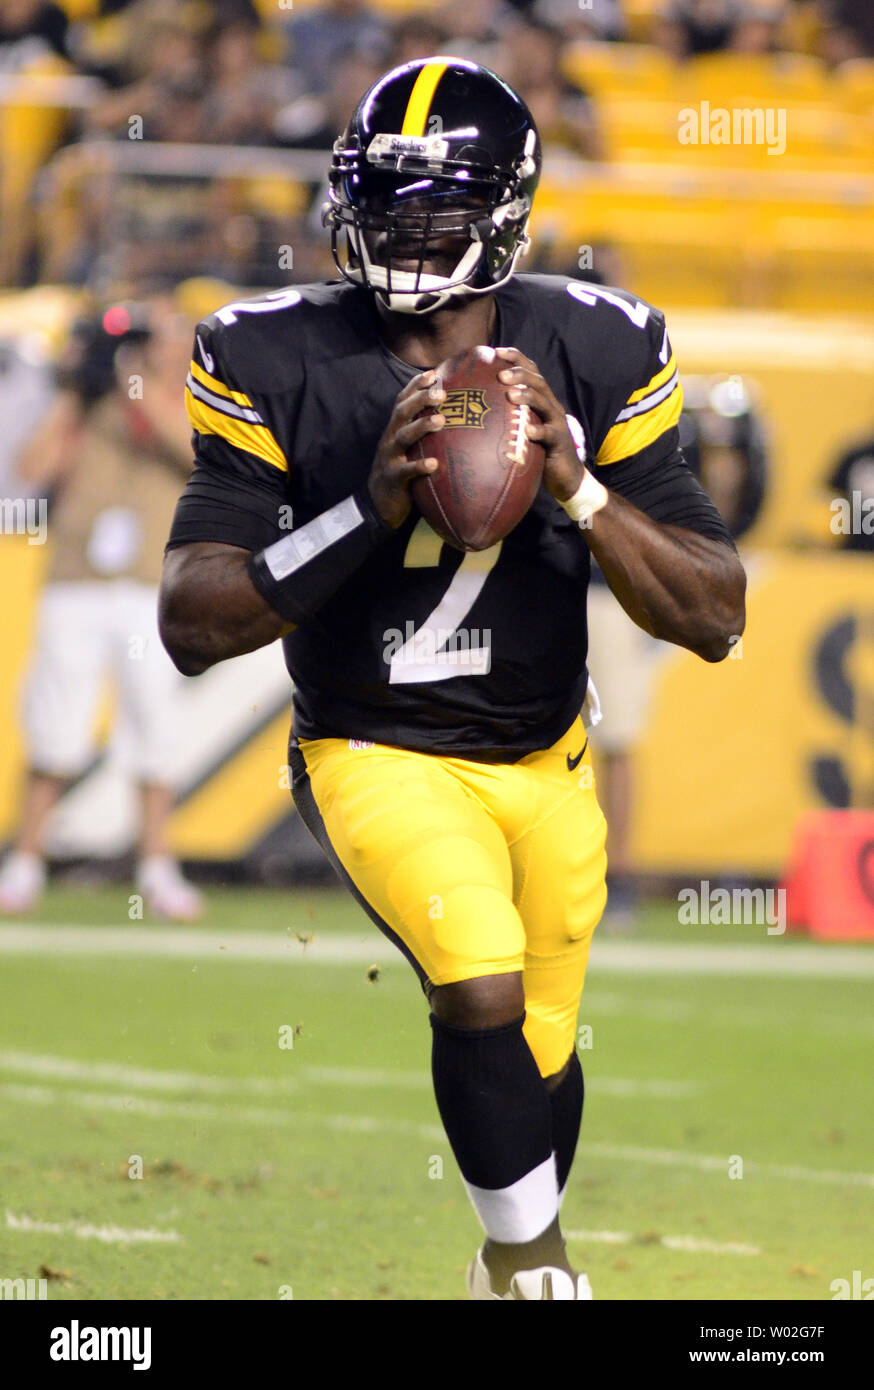 Pittsburgh Steelers quarterback Mike Vick steps back to pass in the first  quarter against the Carolina